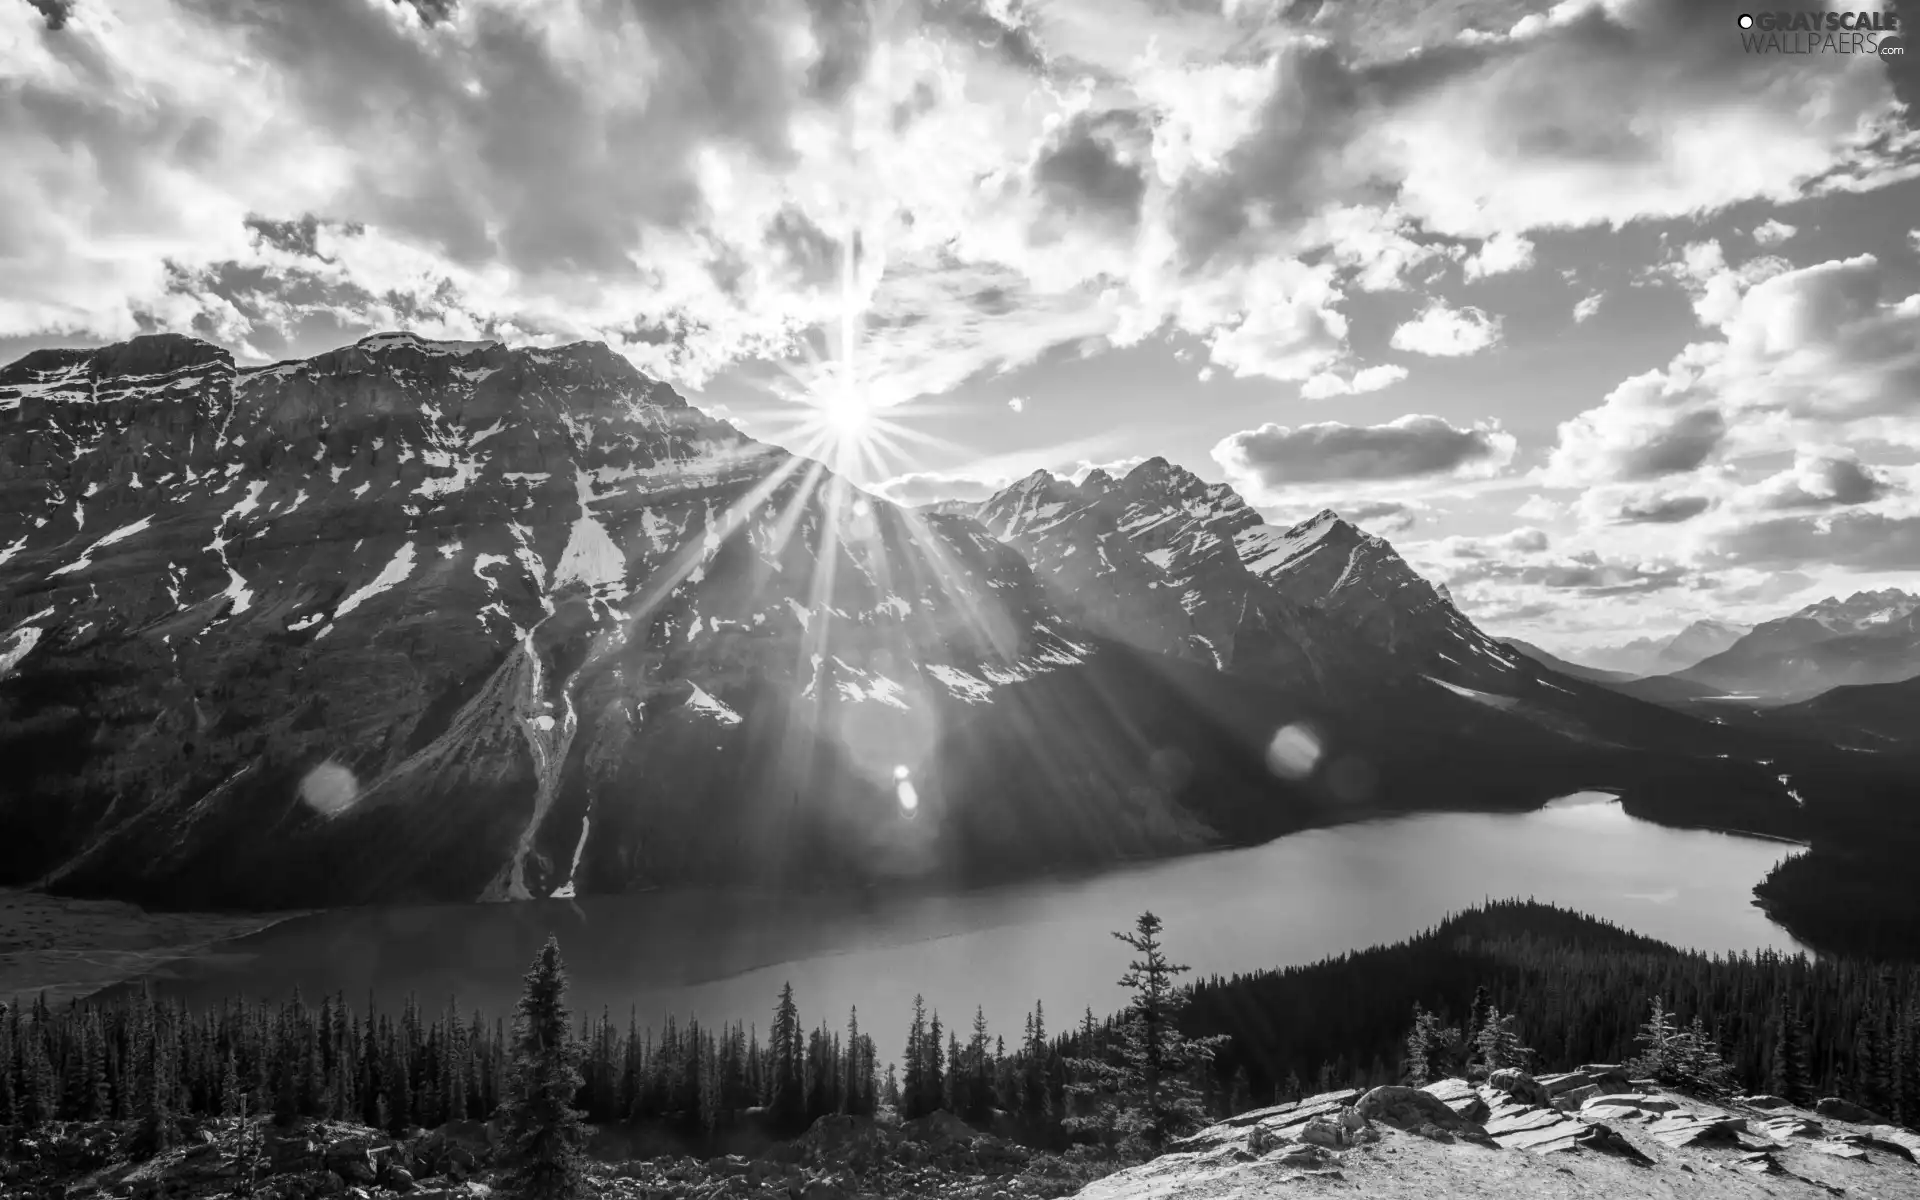 Banff National Park, Peyto Lake, forest, Sky, Province of Alberta, Canada, rays of the Sun, Mountains, clouds